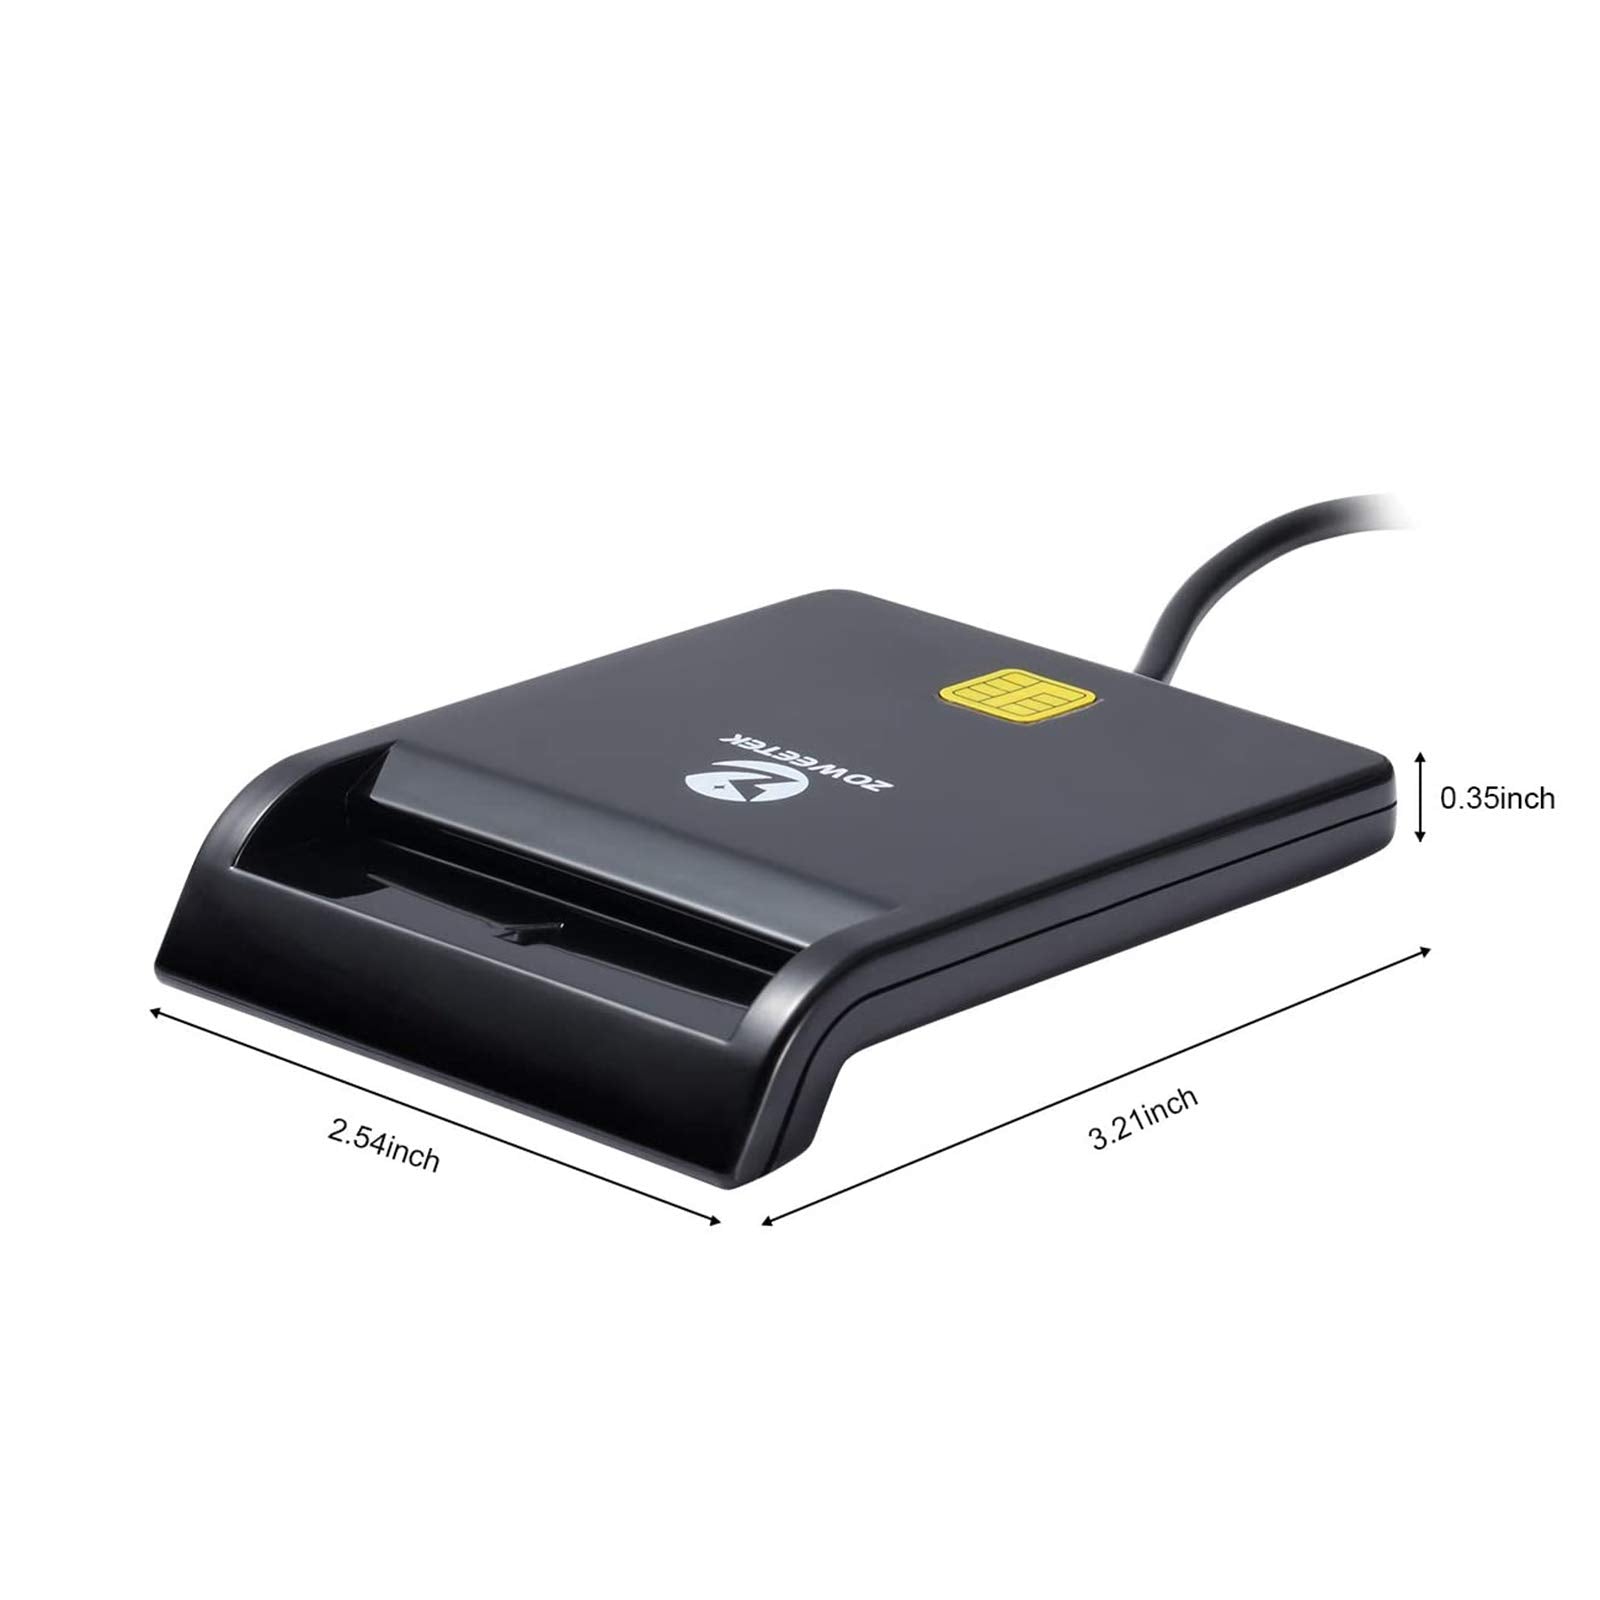 Zoweetek ID Card Reader USB Smart Card Reader for Portuguese, Spainish, Belgian, German and more, Compatible with Windows and Linux